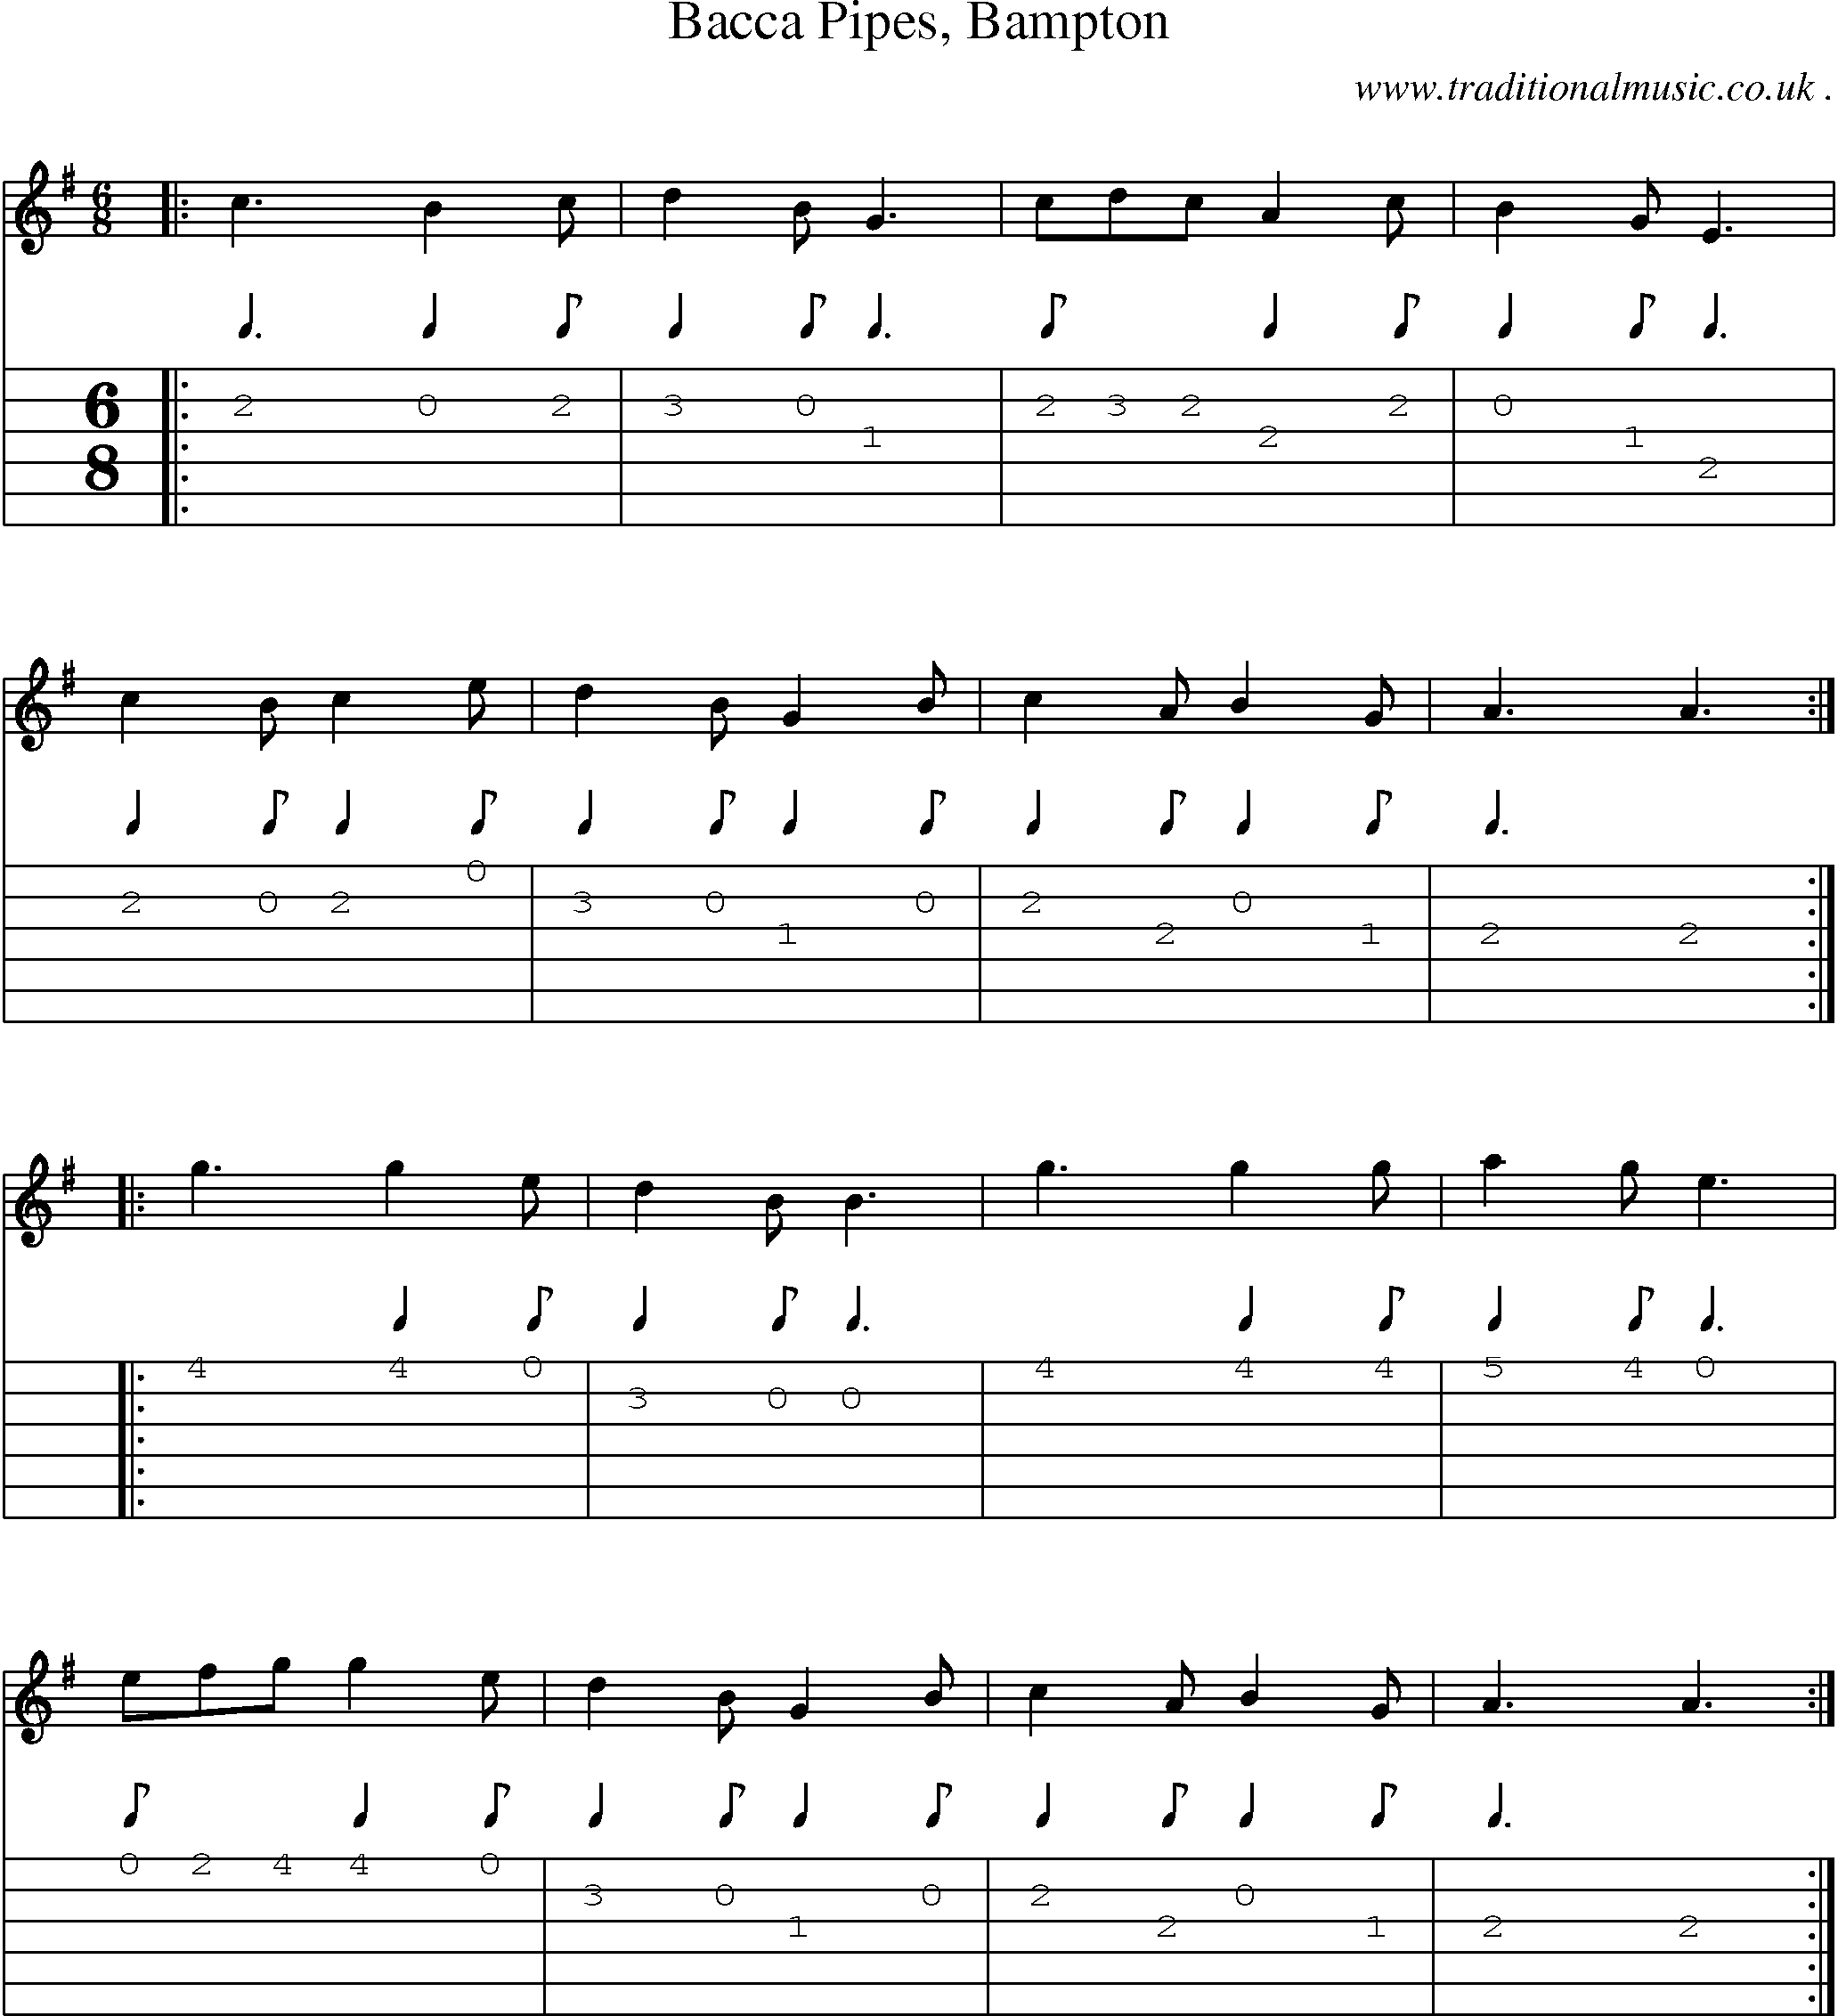 Sheet-Music and Guitar Tabs for Bacca Pipes Bampton